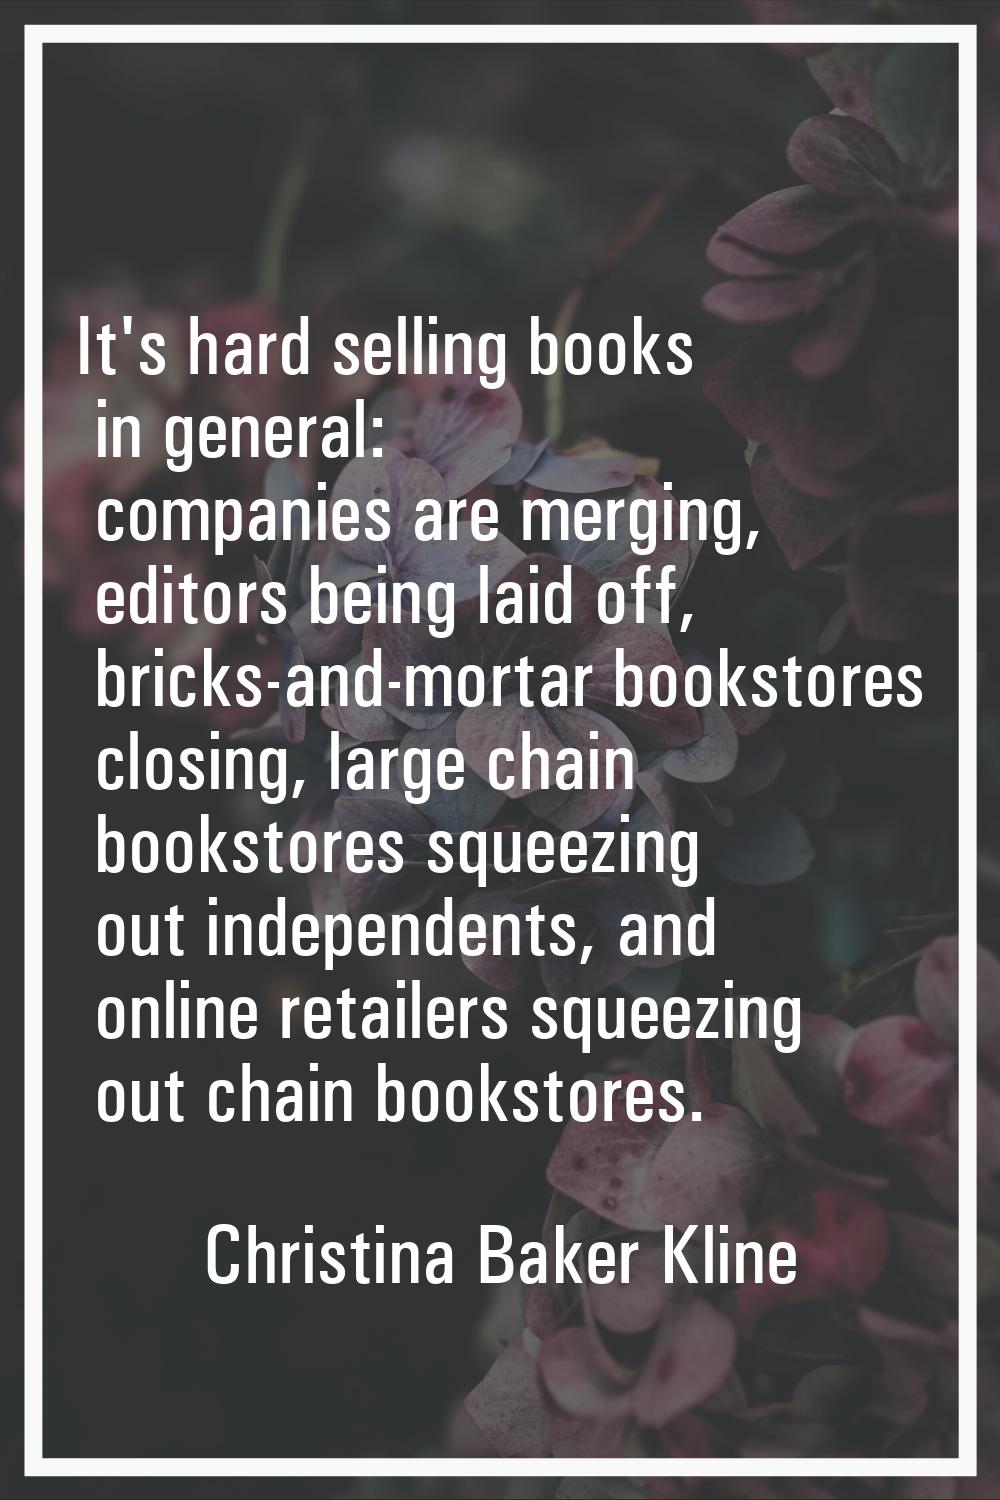 It's hard selling books in general: companies are merging, editors being laid off, bricks-and-morta